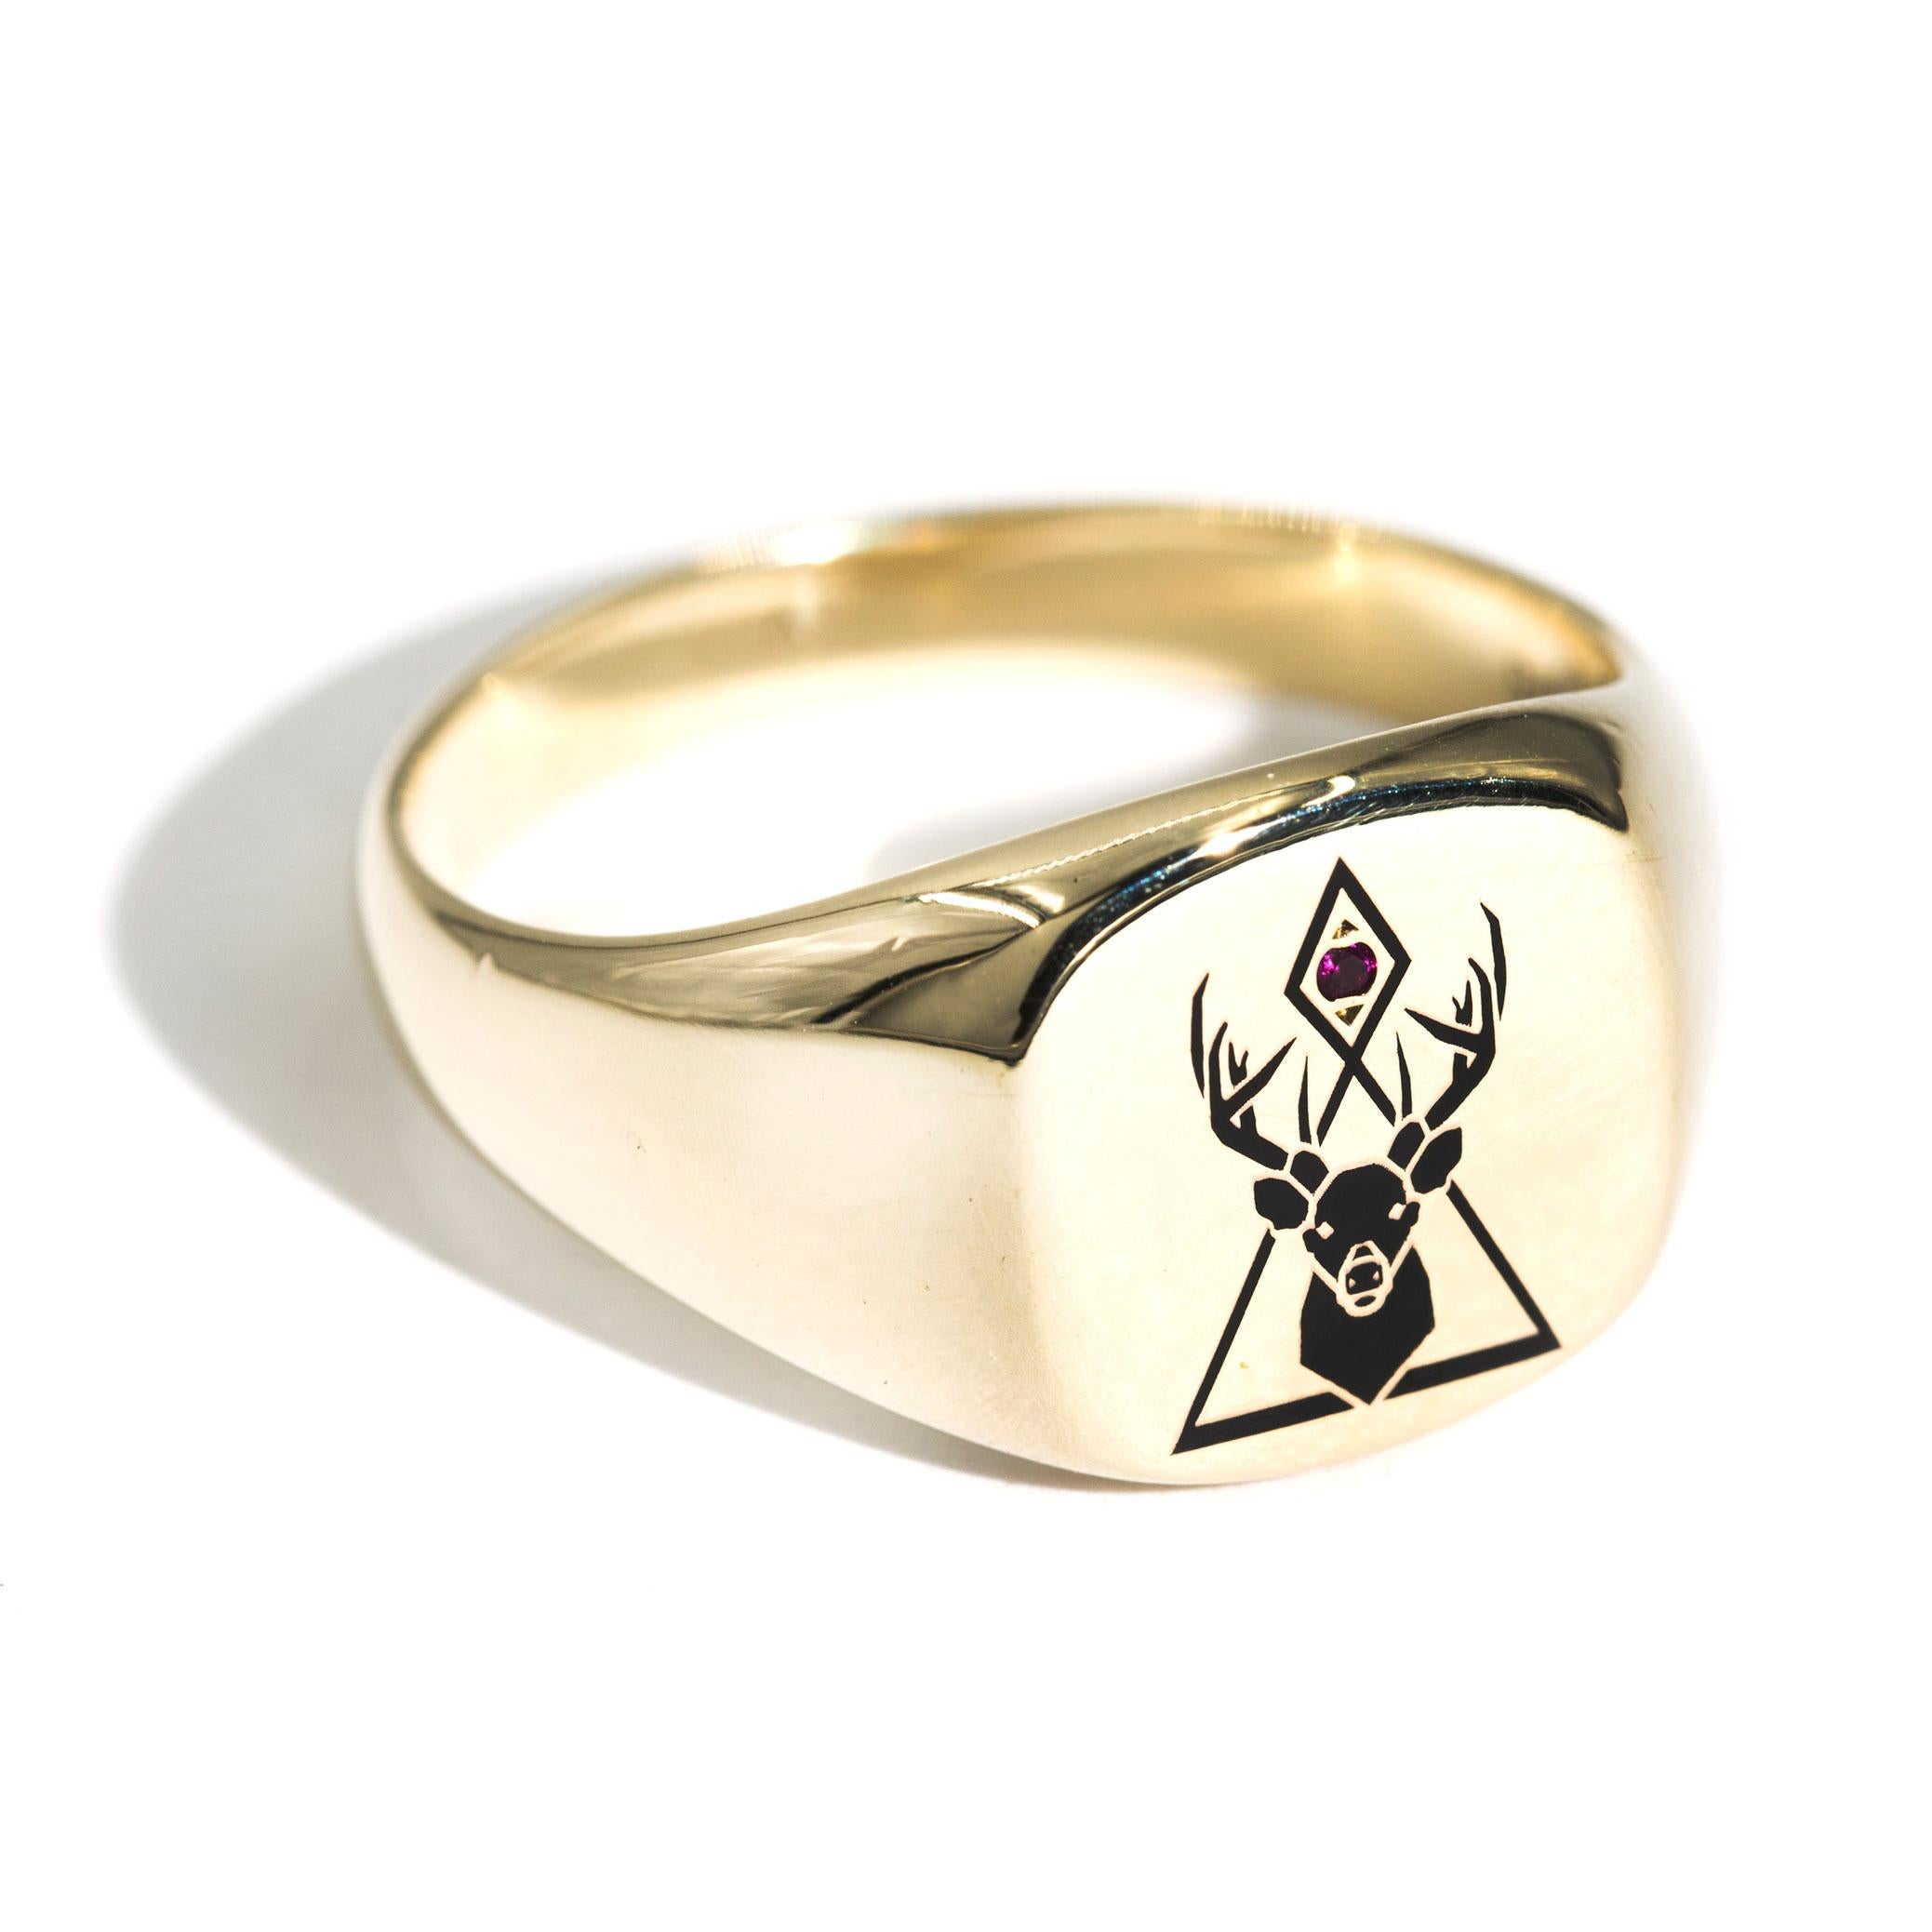 Forged in 9 carat yellow gold is this handsome mens solitaire vintage signet ring that features a black enamelled reindeer head beset with a single round red ruby.  We have named this dapper vintage ring The Kingston Ring. The Kingston Ring has